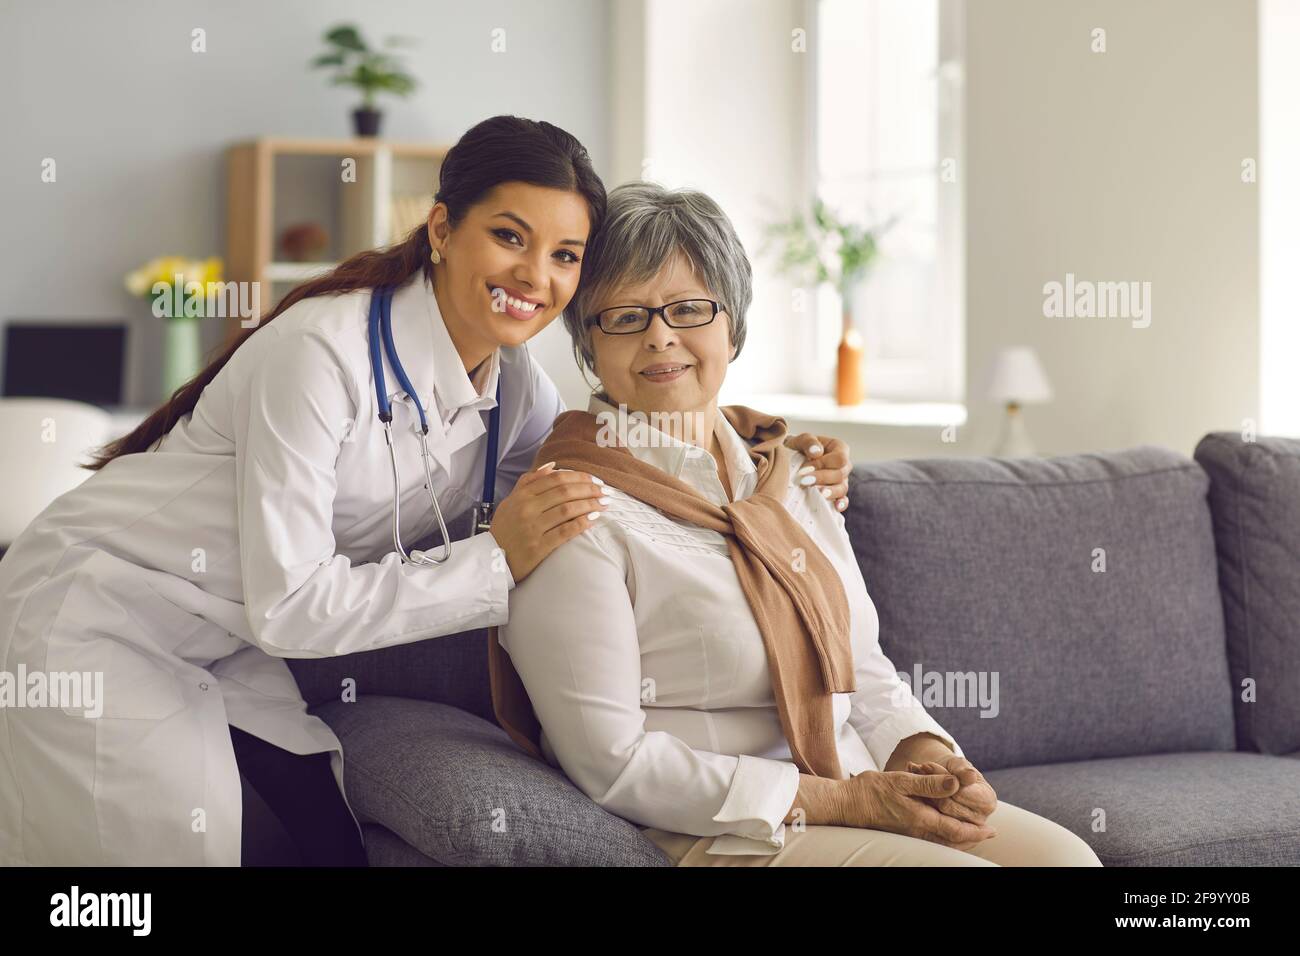 Portrait of smiling young doctor or home care nurse embracing her senior patient Stock Photo